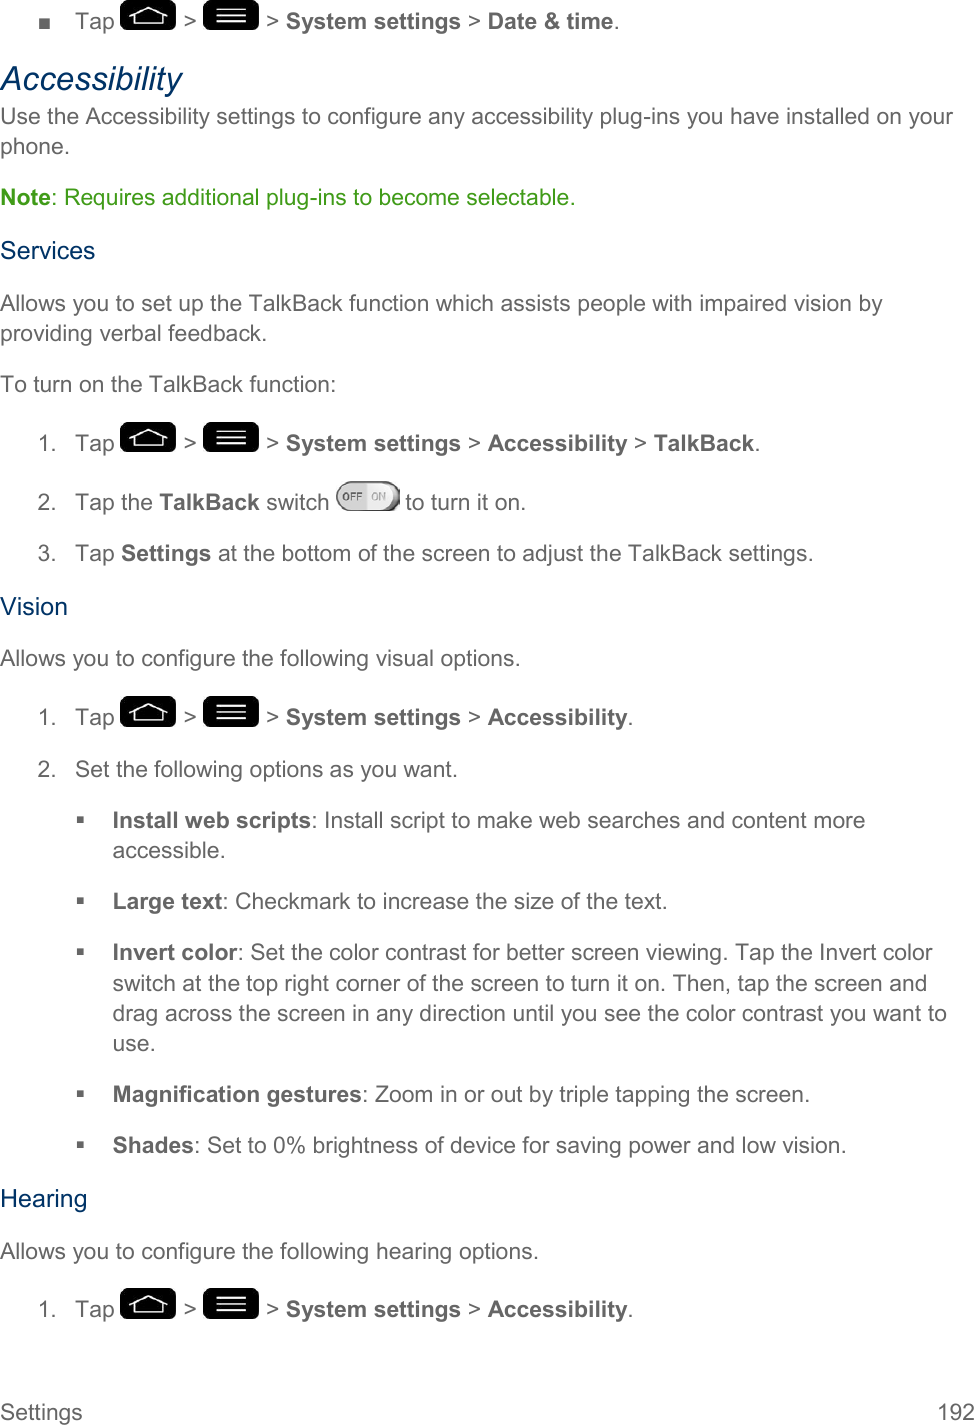 Settings  192 ■  Tap   &gt;   &gt; System settings &gt; Date &amp; time. Accessibility Use the Accessibility settings to configure any accessibility plug-ins you have installed on your phone. Note: Requires additional plug-ins to become selectable. Services Allows you to set up the TalkBack function which assists people with impaired vision by providing verbal feedback. To turn on the TalkBack function: 1.  Tap   &gt;   &gt; System settings &gt; Accessibility &gt; TalkBack. 2.  Tap the TalkBack switch   to turn it on. 3.  Tap Settings at the bottom of the screen to adjust the TalkBack settings. Vision Allows you to configure the following visual options. 1.  Tap   &gt;   &gt; System settings &gt; Accessibility. 2.  Set the following options as you want.  Install web scripts: Install script to make web searches and content more accessible.  Large text: Checkmark to increase the size of the text.  Invert color: Set the color contrast for better screen viewing. Tap the Invert color switch at the top right corner of the screen to turn it on. Then, tap the screen and drag across the screen in any direction until you see the color contrast you want to use.  Magnification gestures: Zoom in or out by triple tapping the screen.  Shades: Set to 0% brightness of device for saving power and low vision. Hearing Allows you to configure the following hearing options. 1.  Tap   &gt;   &gt; System settings &gt; Accessibility. 